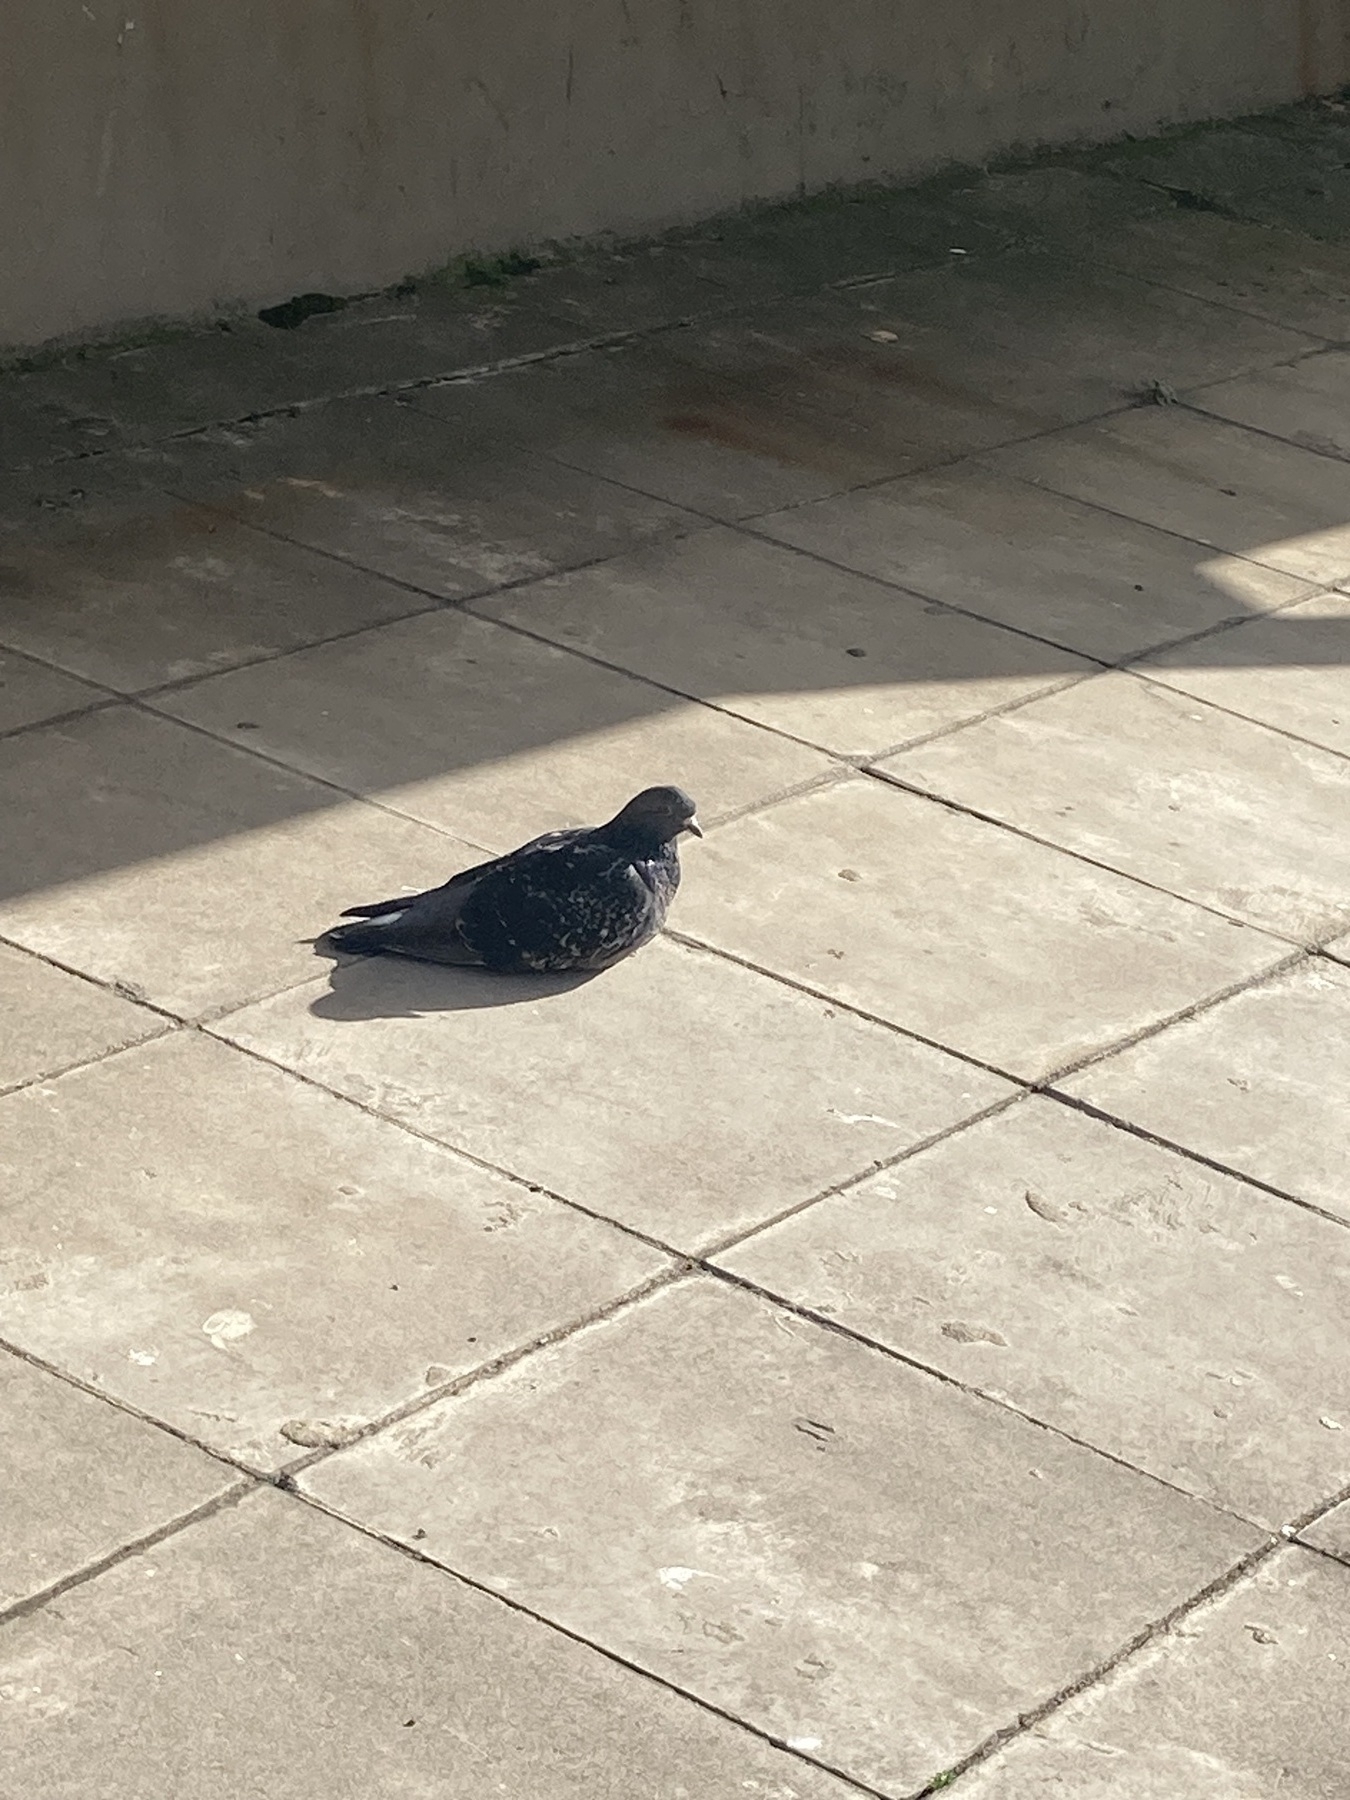 A pigeon in a patch of morning sunlight